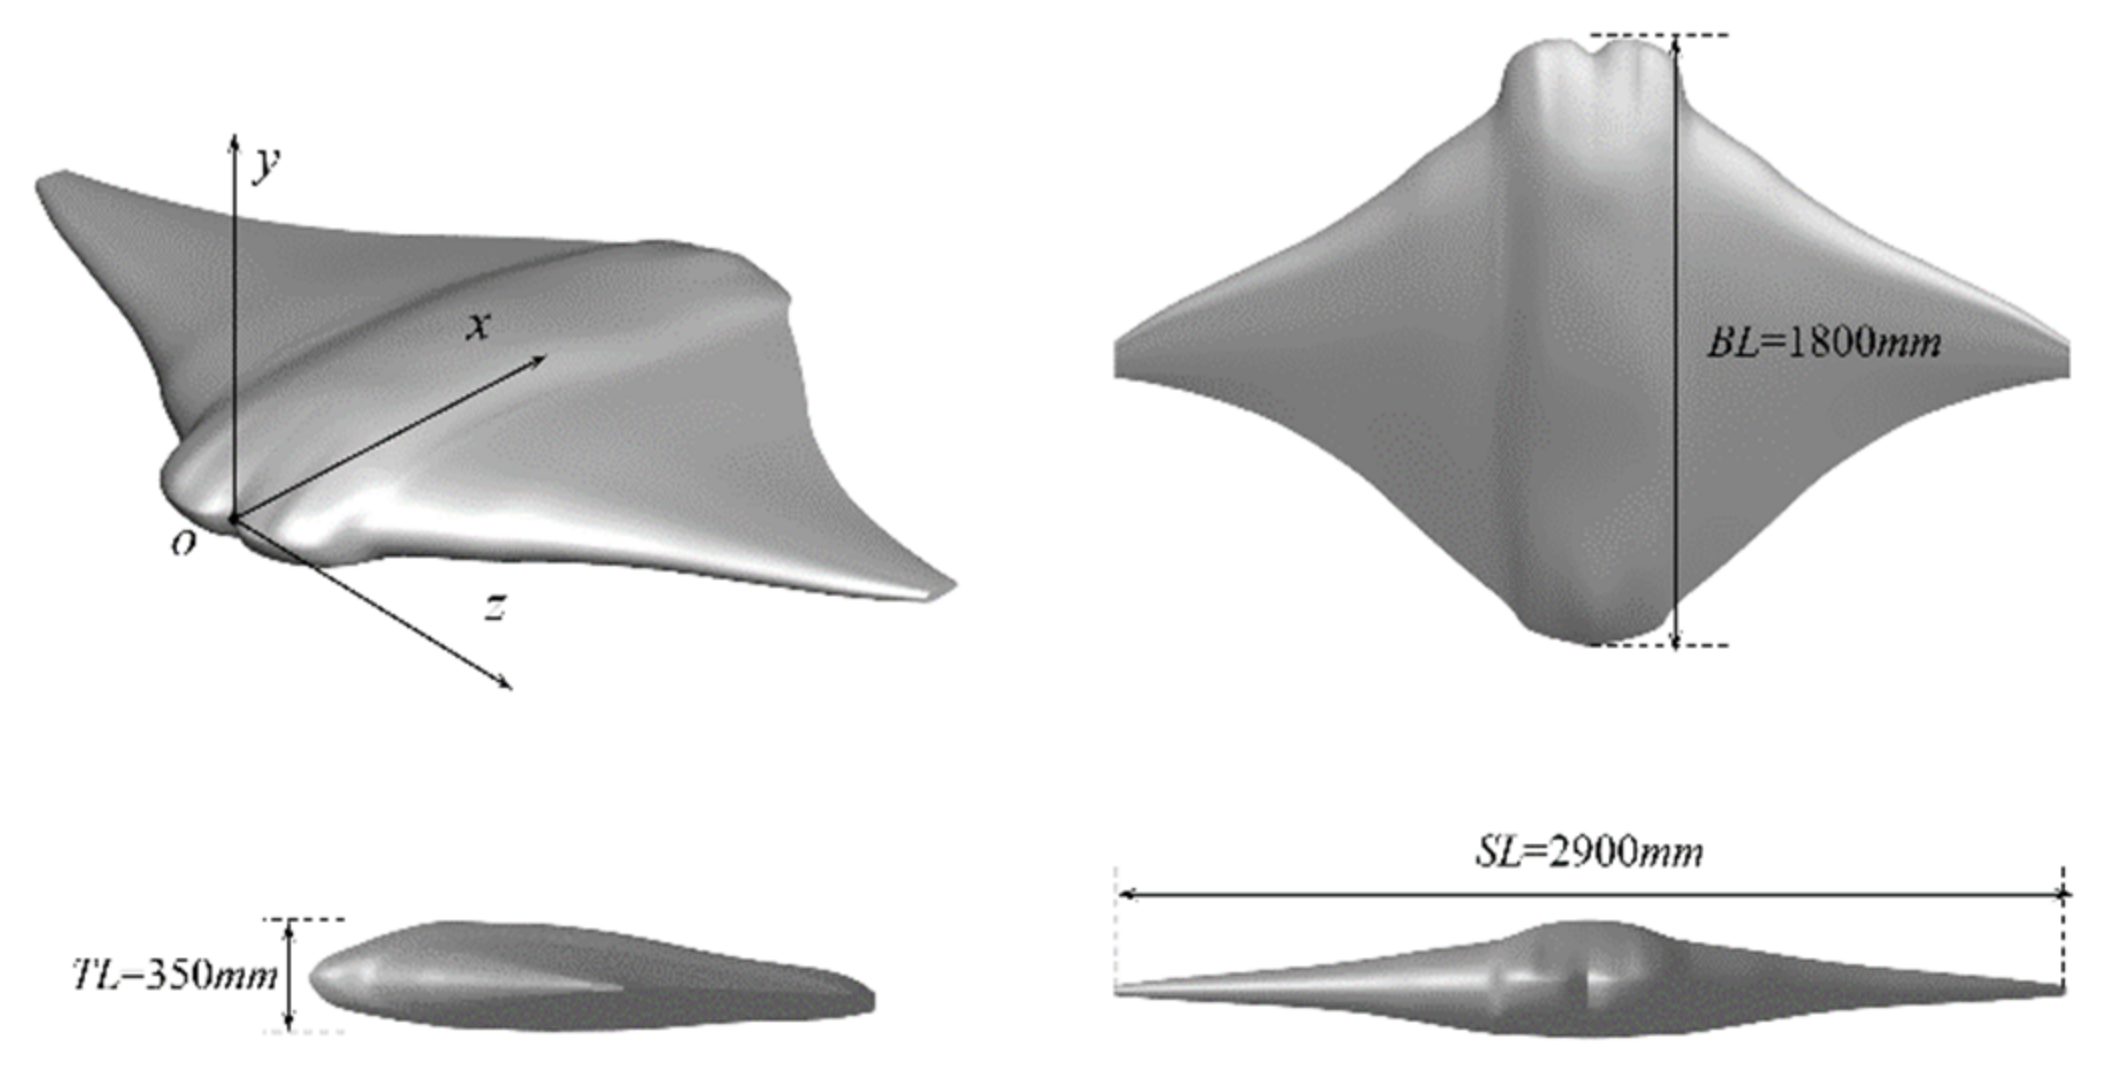 JMSE | Free Full-Text | Investigation of the Hydrodynamic Characteristics  of Two Manta Rays Tandem Gliding | HTML